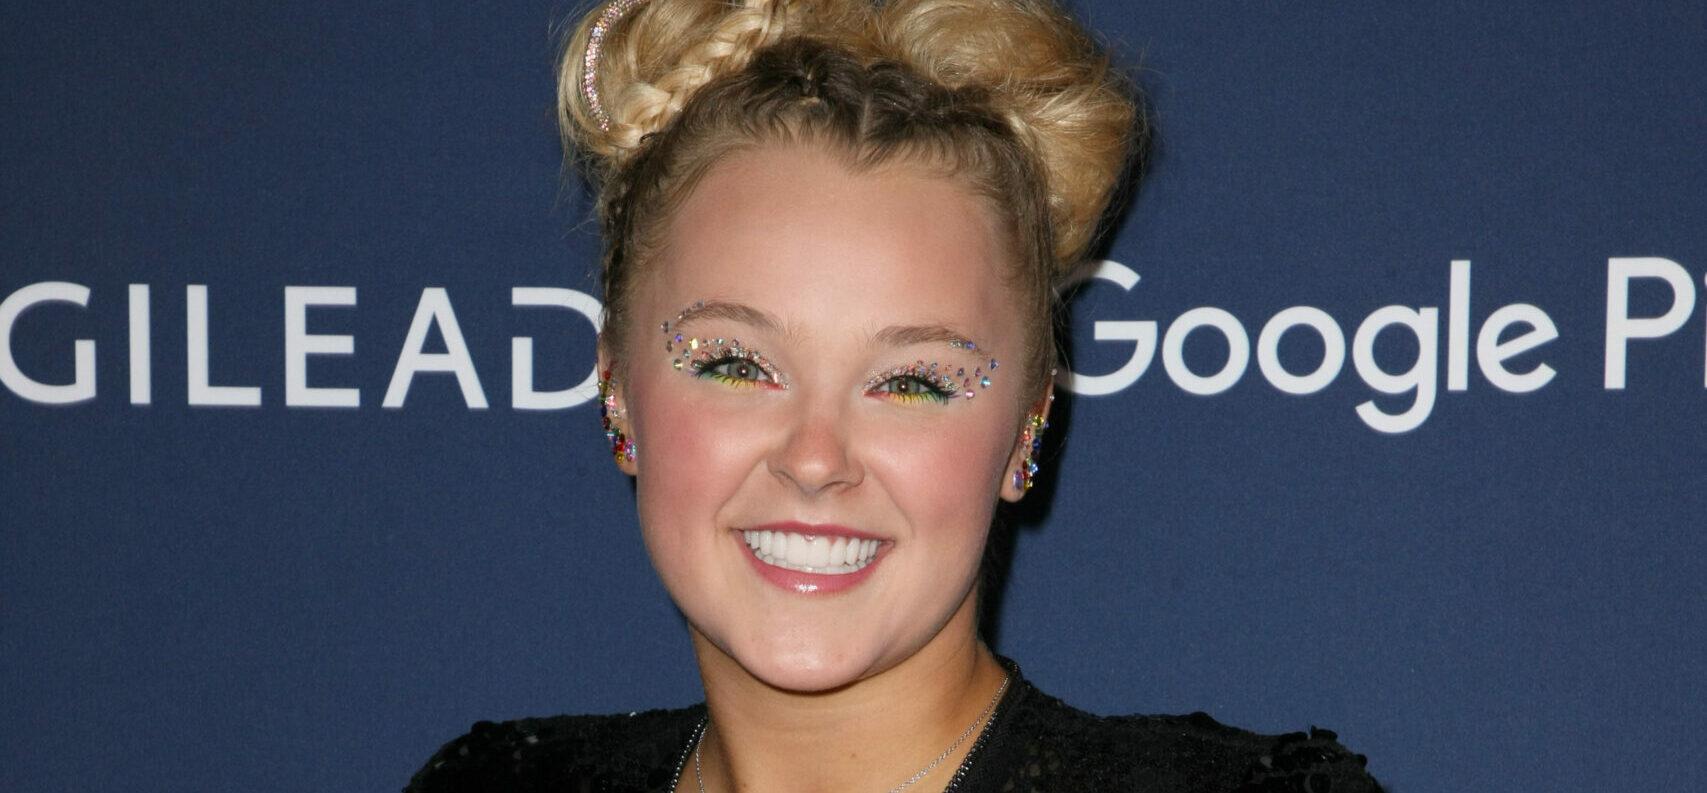 JoJo Siwa Recalls How Former Company Treated Her Badly When She Came Out